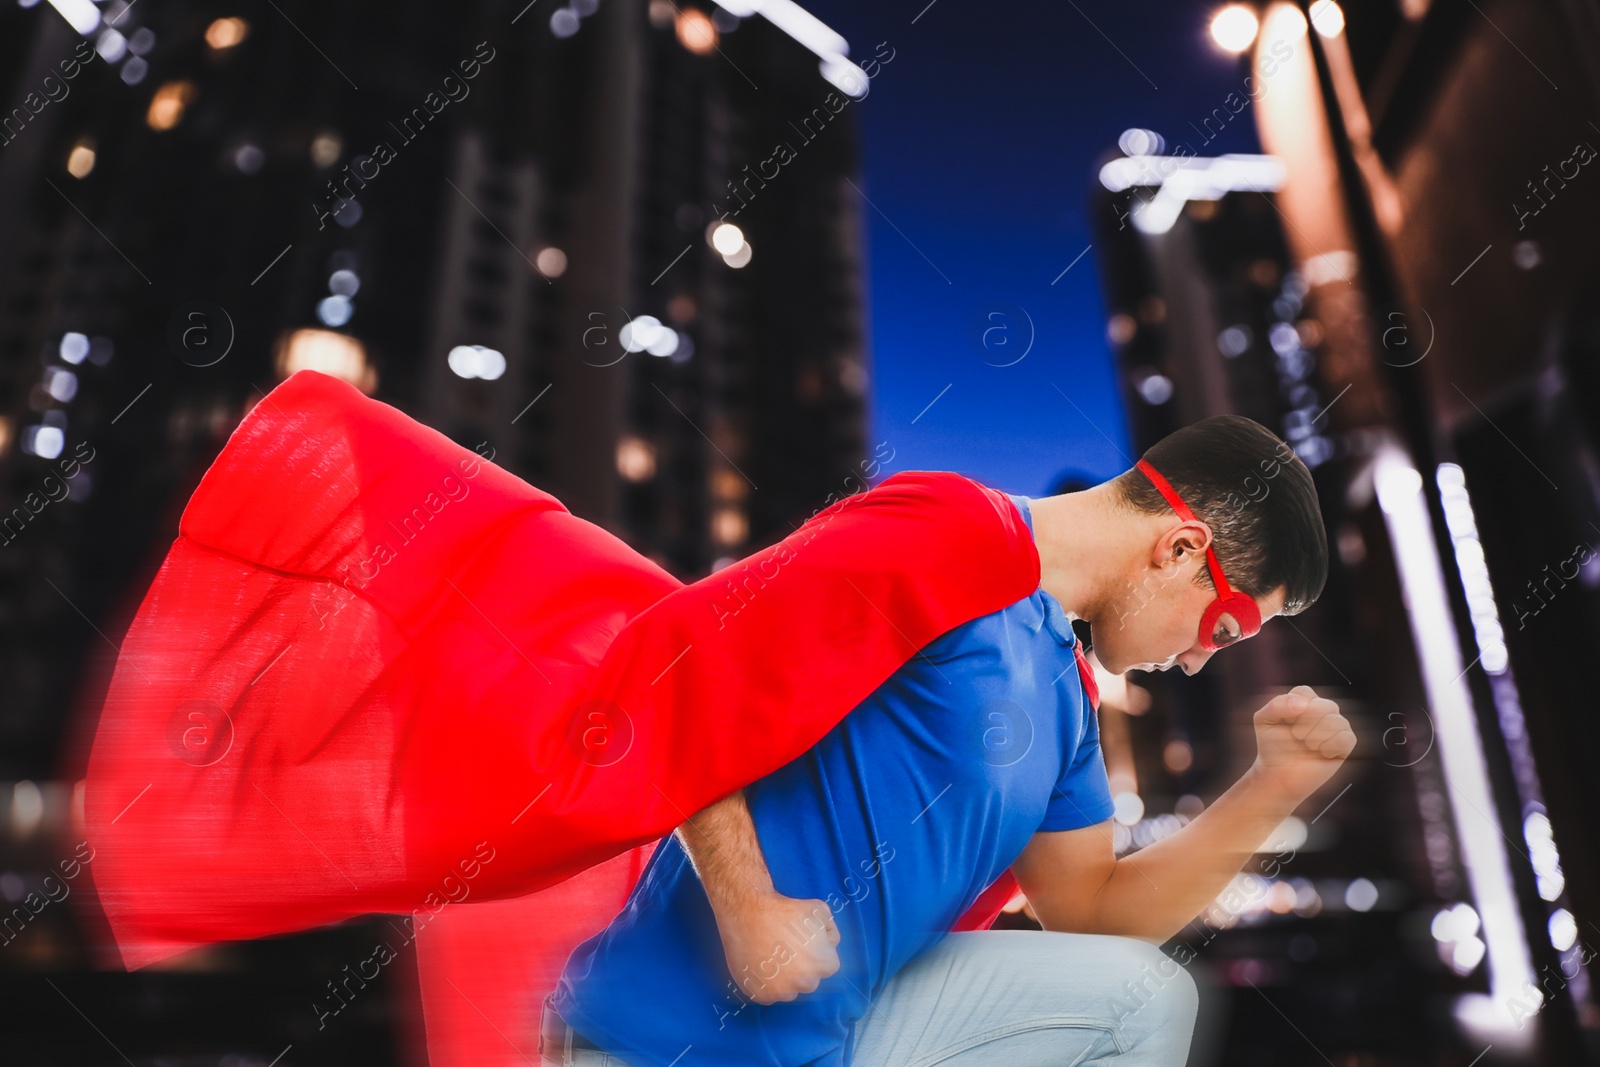 Image of Man wearing superhero costume and beautiful cityscape in night on background